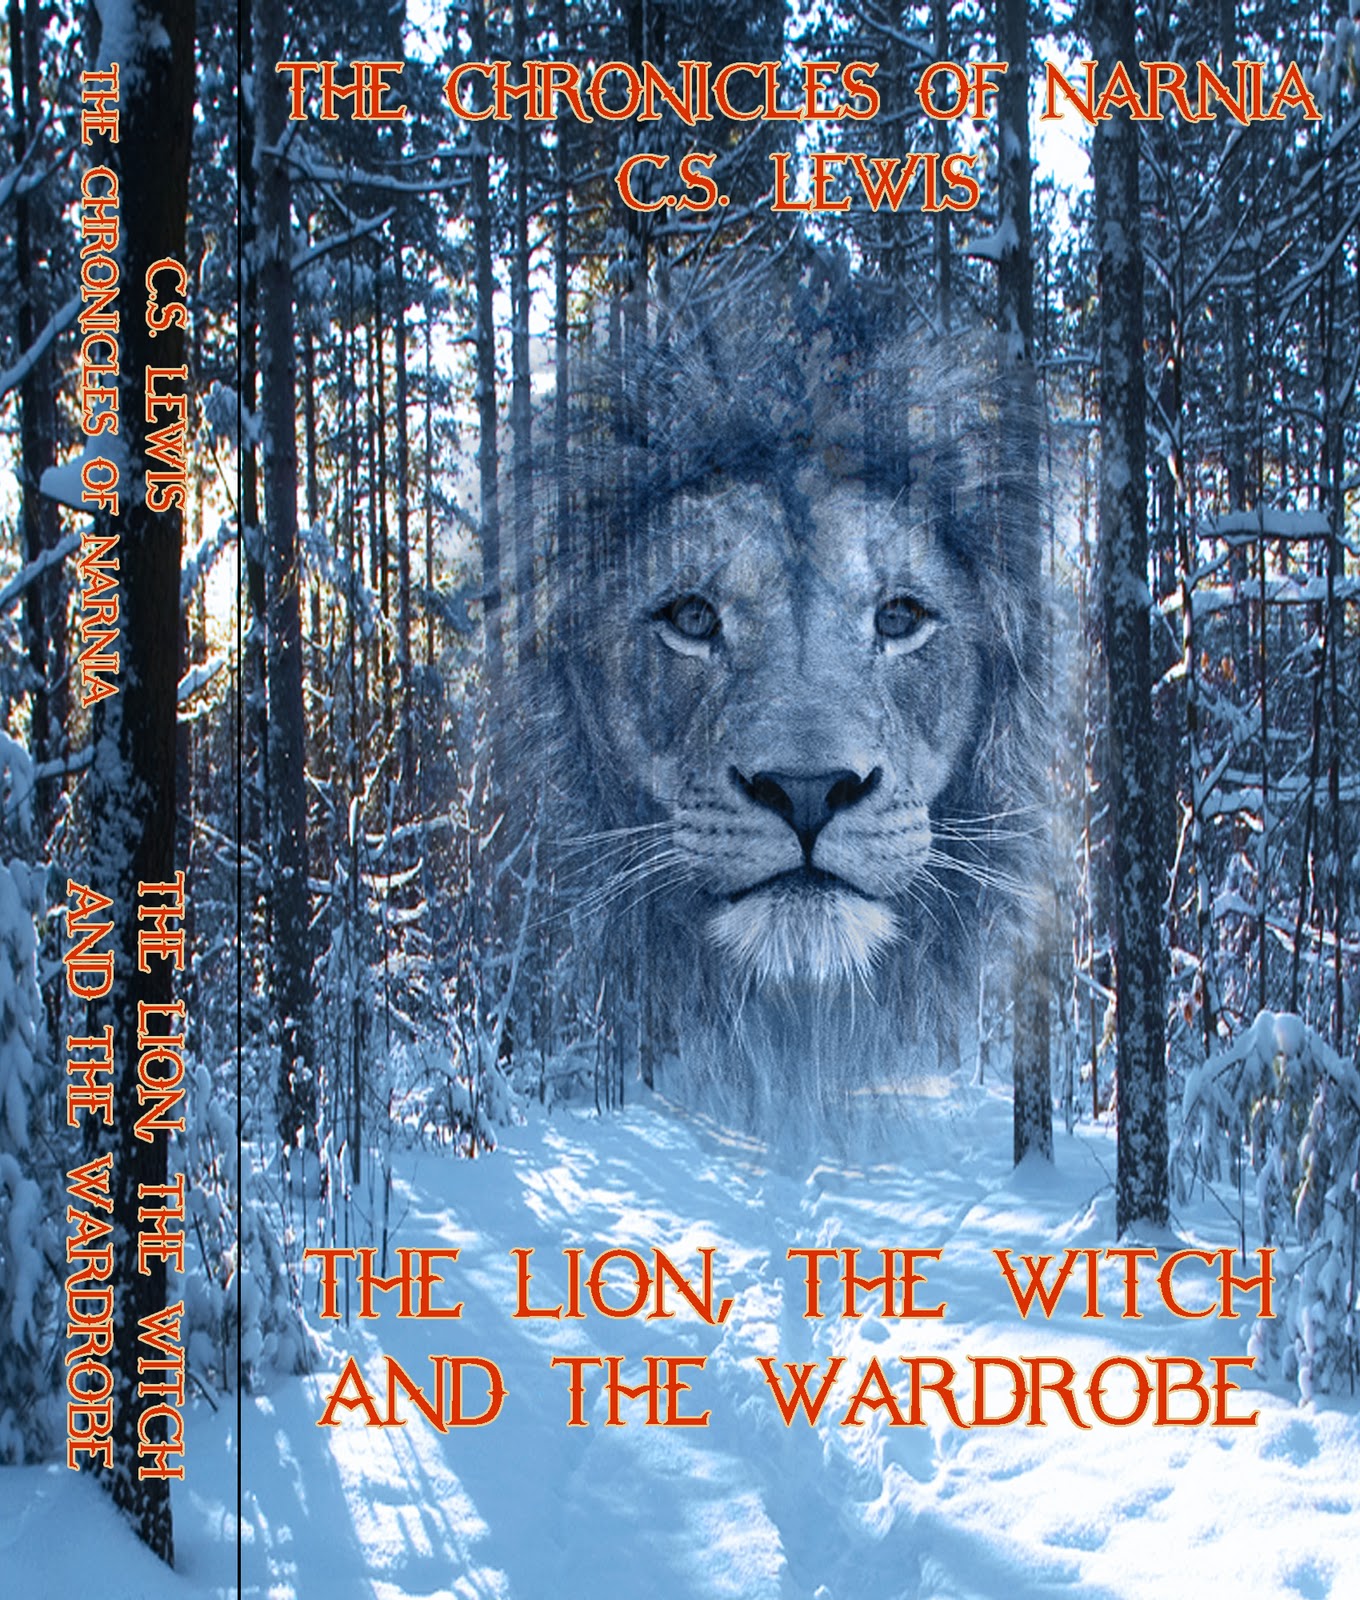 Digital Art & Design: The Lion, The Witch and The Wardrobe